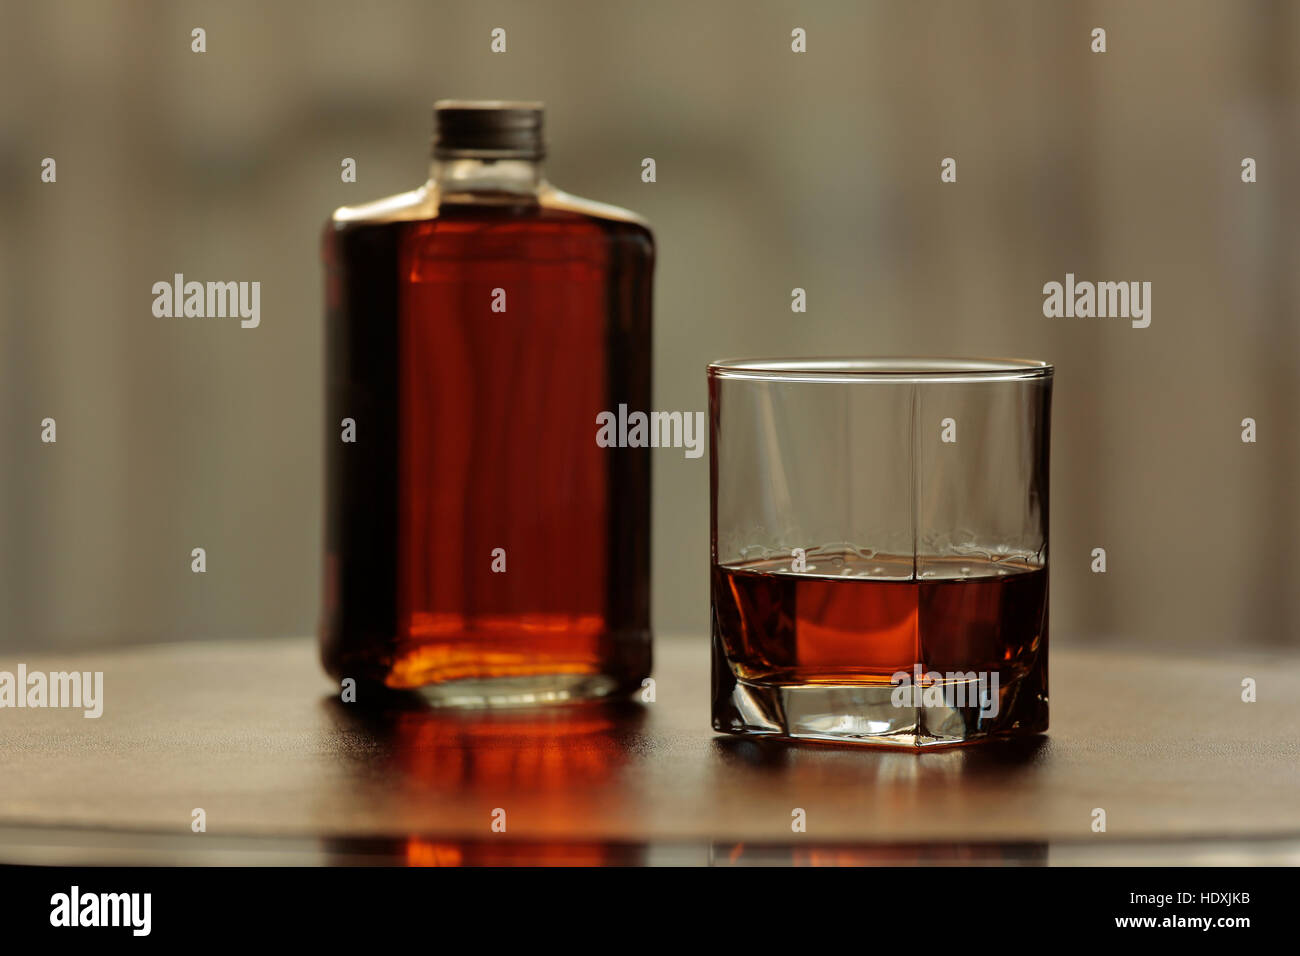 Bottle and glass with whisky together on leather and mahogany table Stock Photo